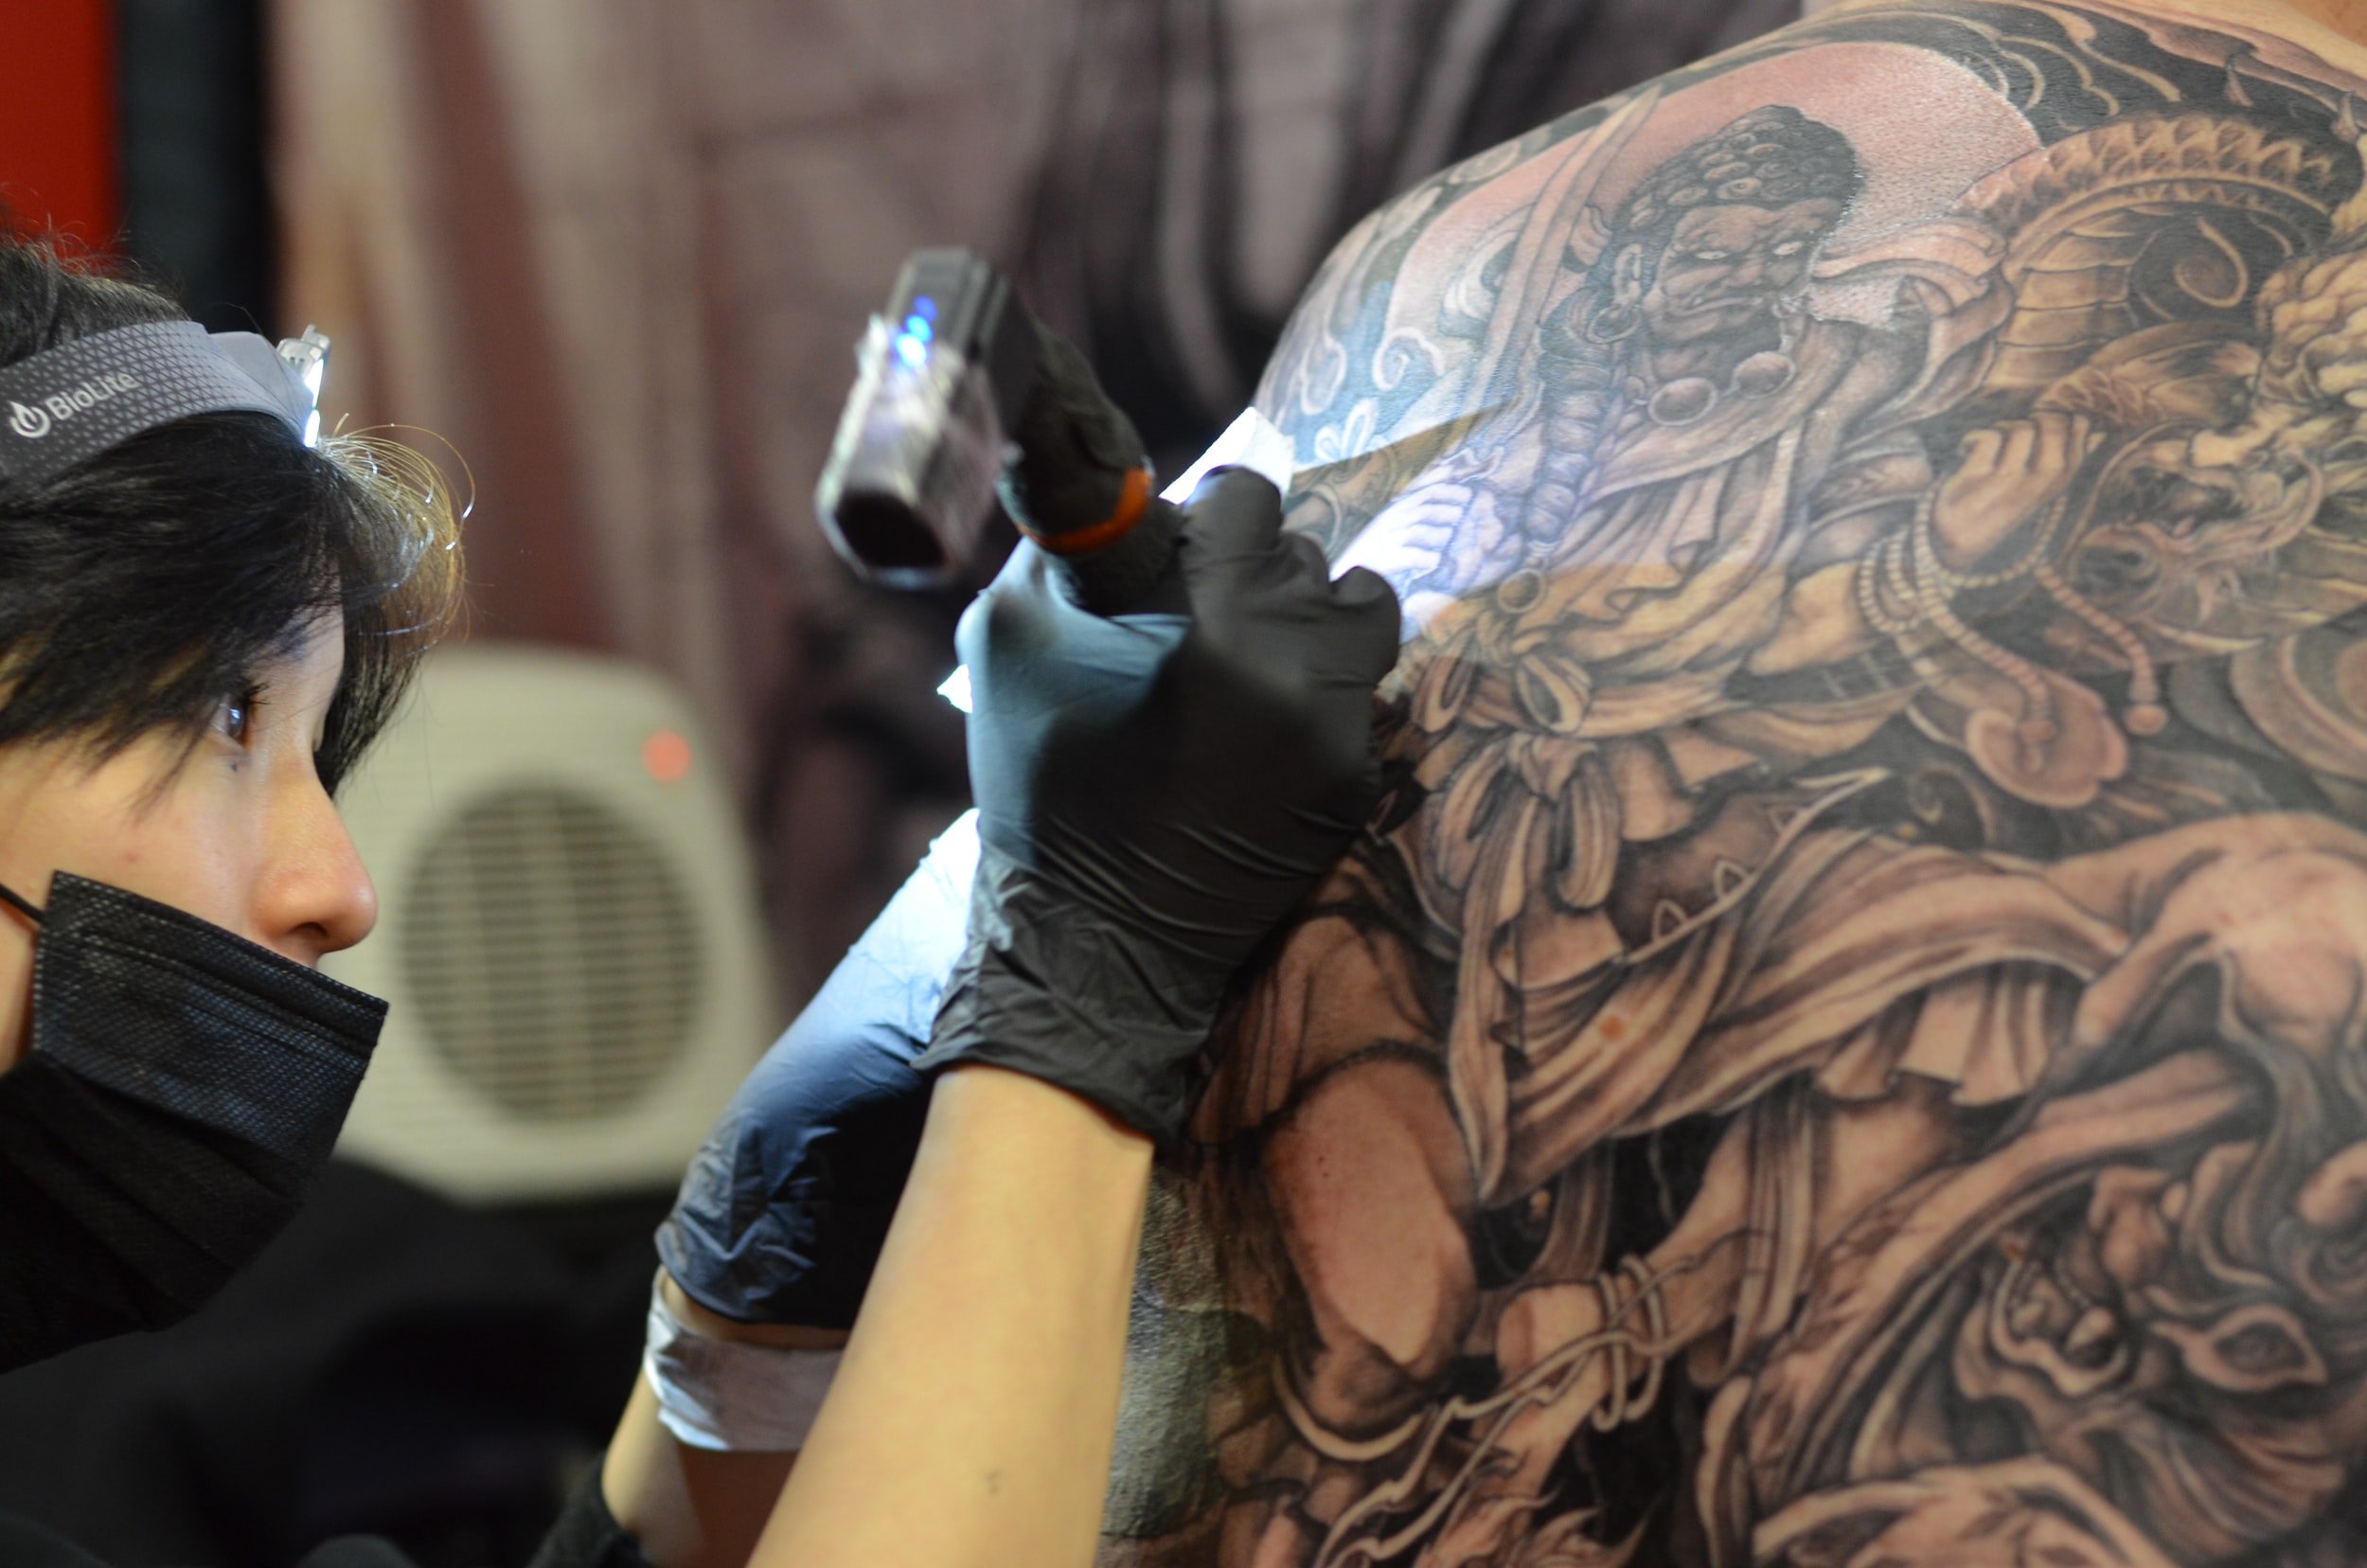 MUFFS_TATTOO_STUDIO — MOTHER MERRY TATTOO FOR SCAR COVERUP BY M.K.CHARAN...